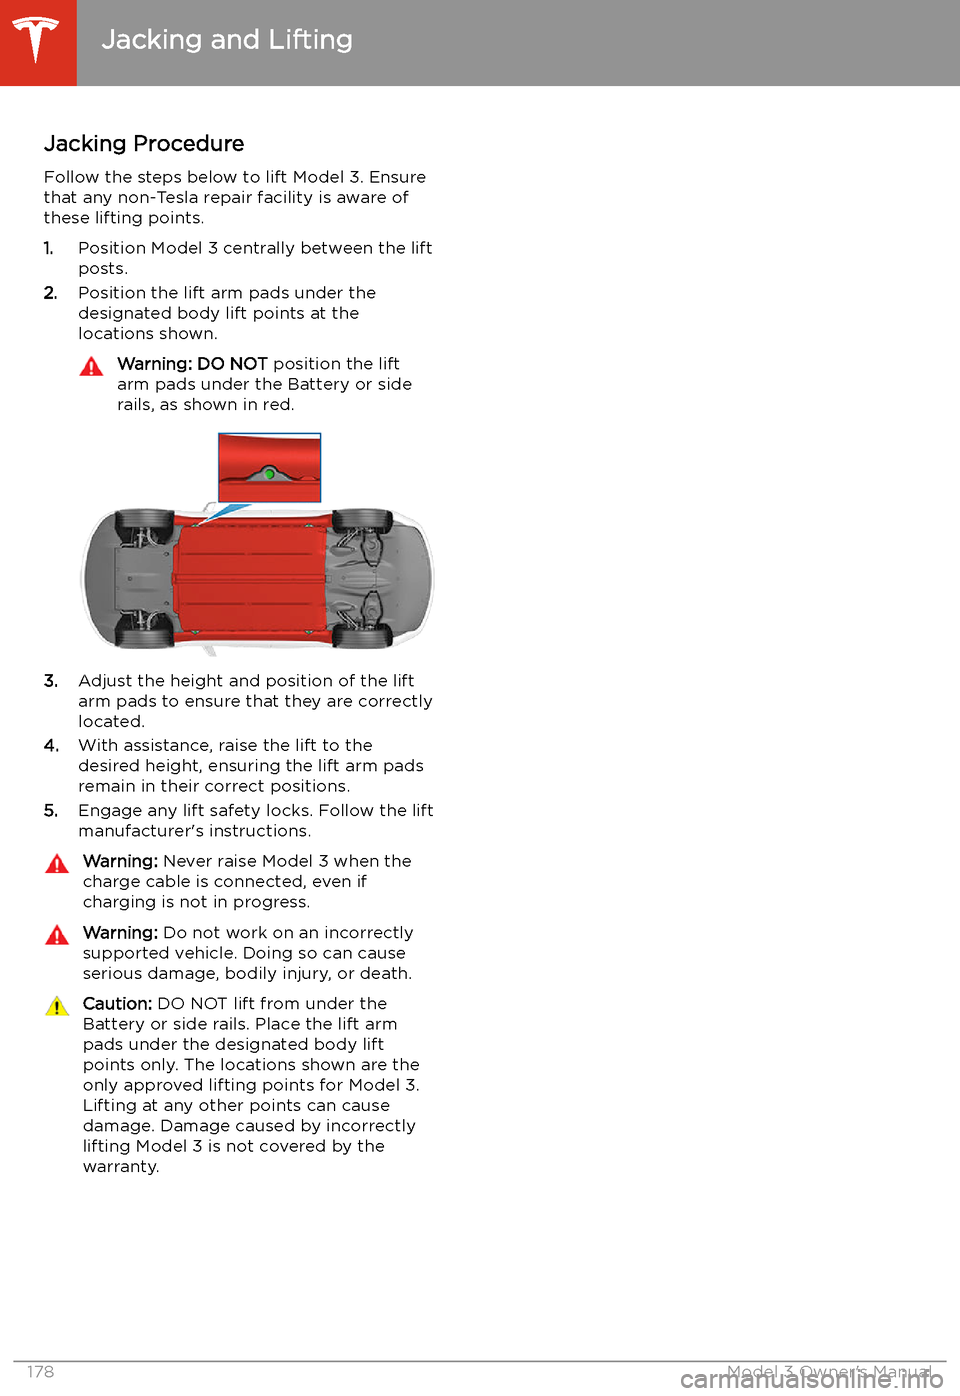 TESLA MODEL 3 2020  Owners Manuals Jacking and Lifting
Jacking Procedure
Follow the steps below to lift Model 3. Ensure
that any non-Tesla repair facility is aware of
these lifting points.
1. Position Model 3 centrally between the lift